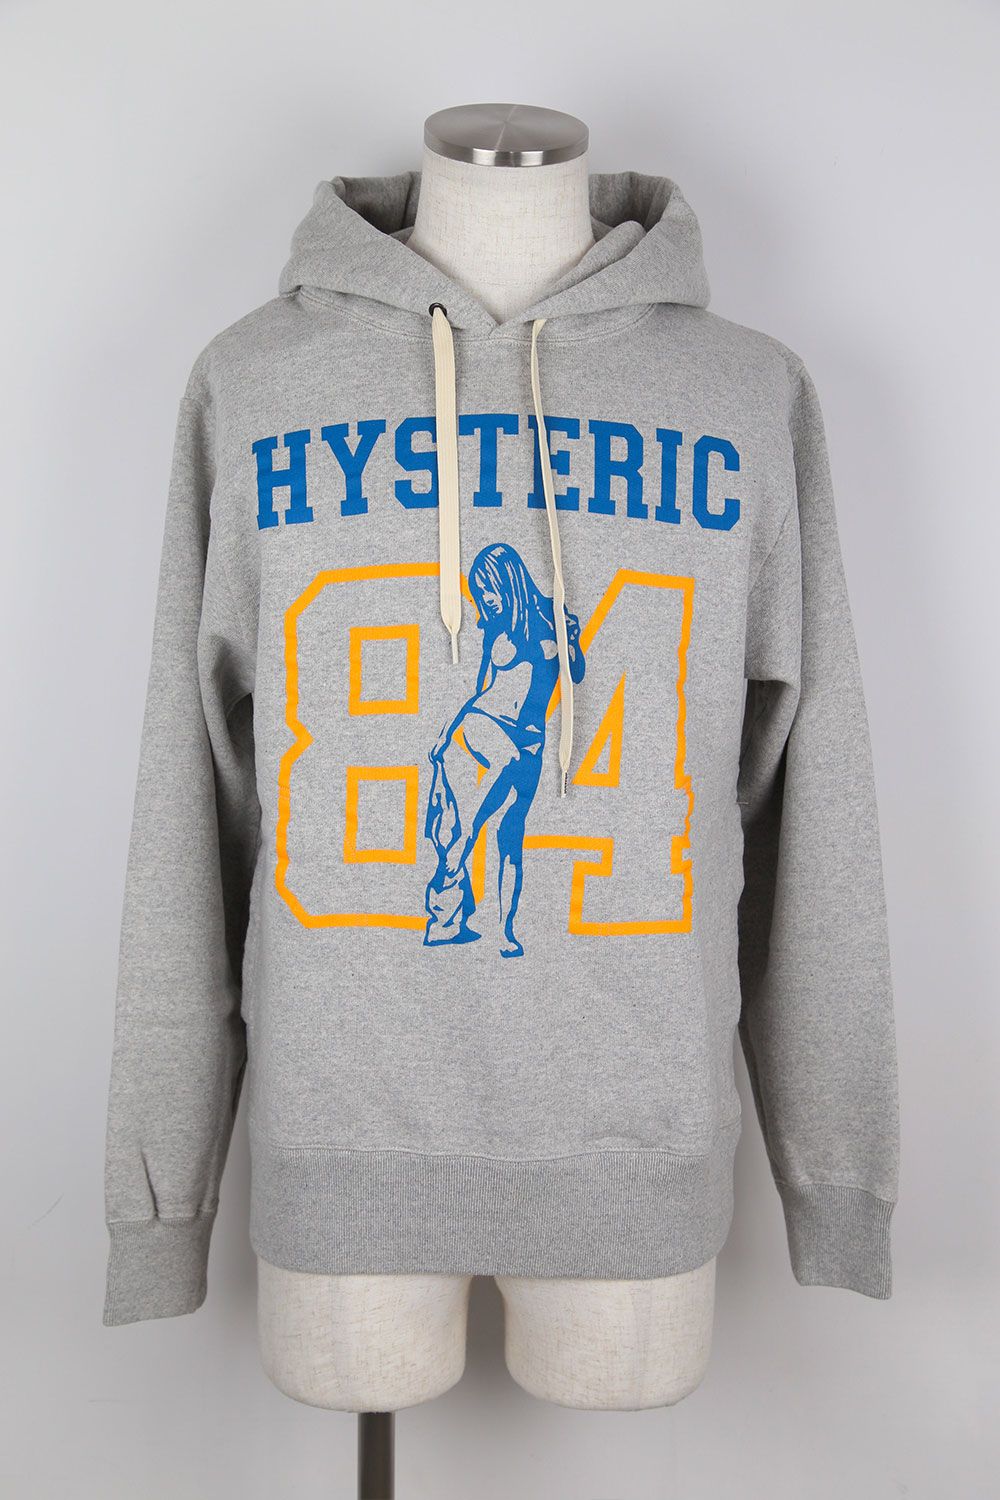 HYSTERIC GLAMOUR - HYS TIMES COLLEGE パーカー / トップ